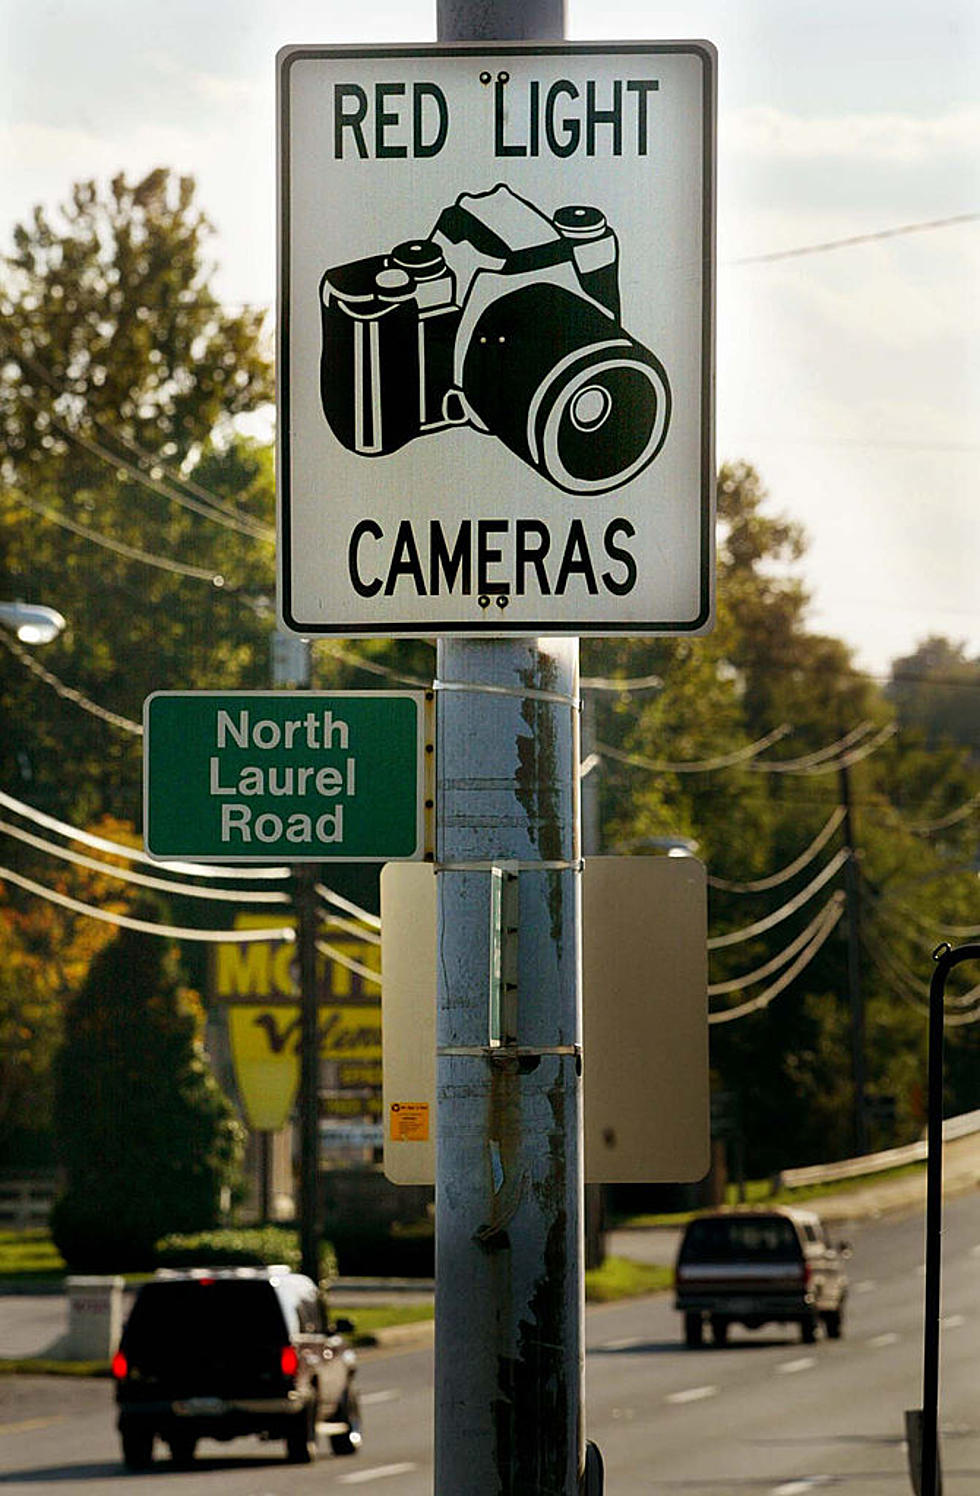 Red Light Cameras Are Illegal in Texas, But Some Cities Still Use Them?